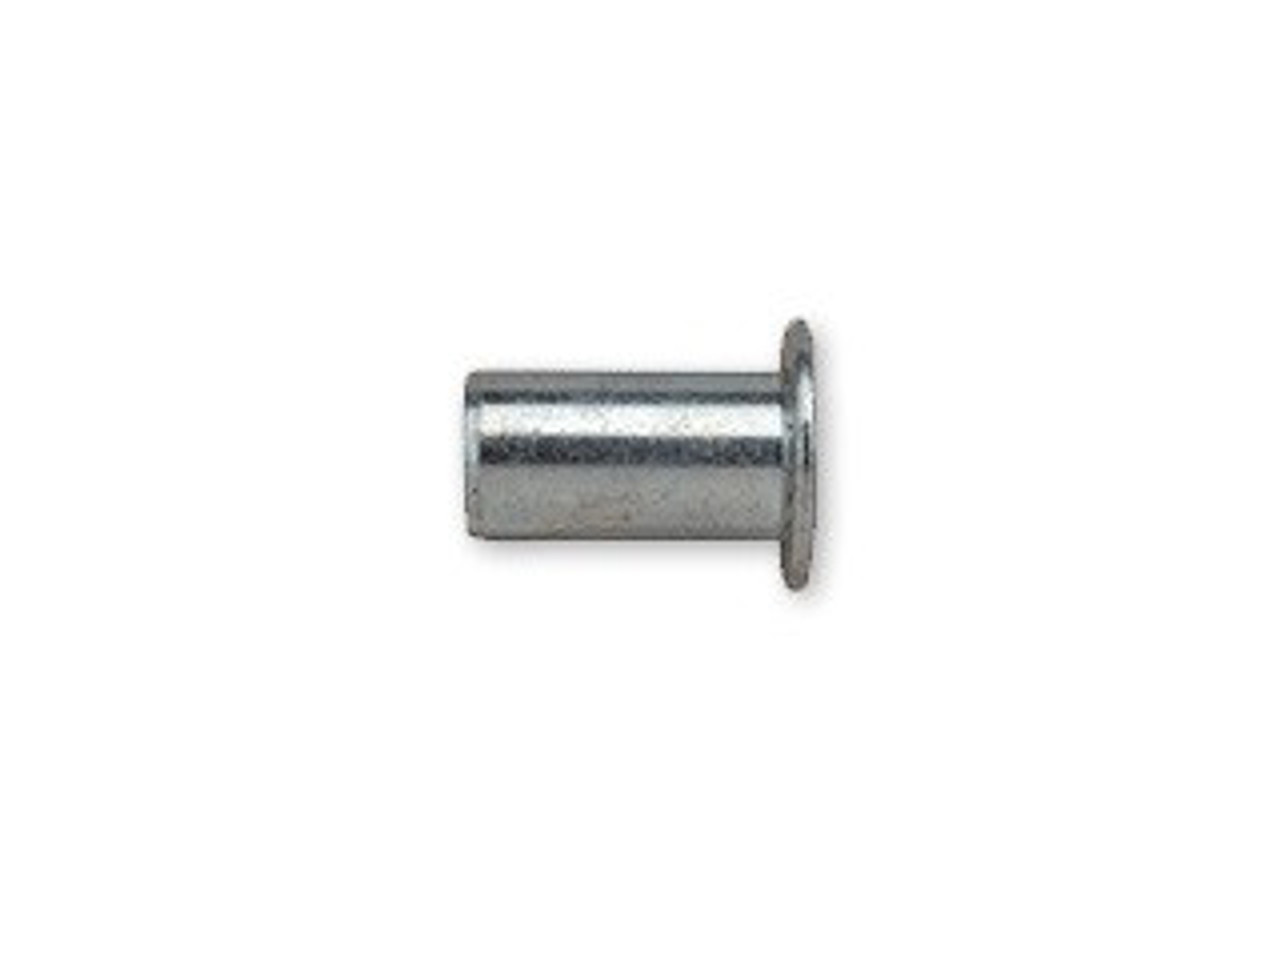 Sioux Tools SCN-420 Clinch Nut Front-End Attachment for Clinch Tools, 1/4-20 Thread Size